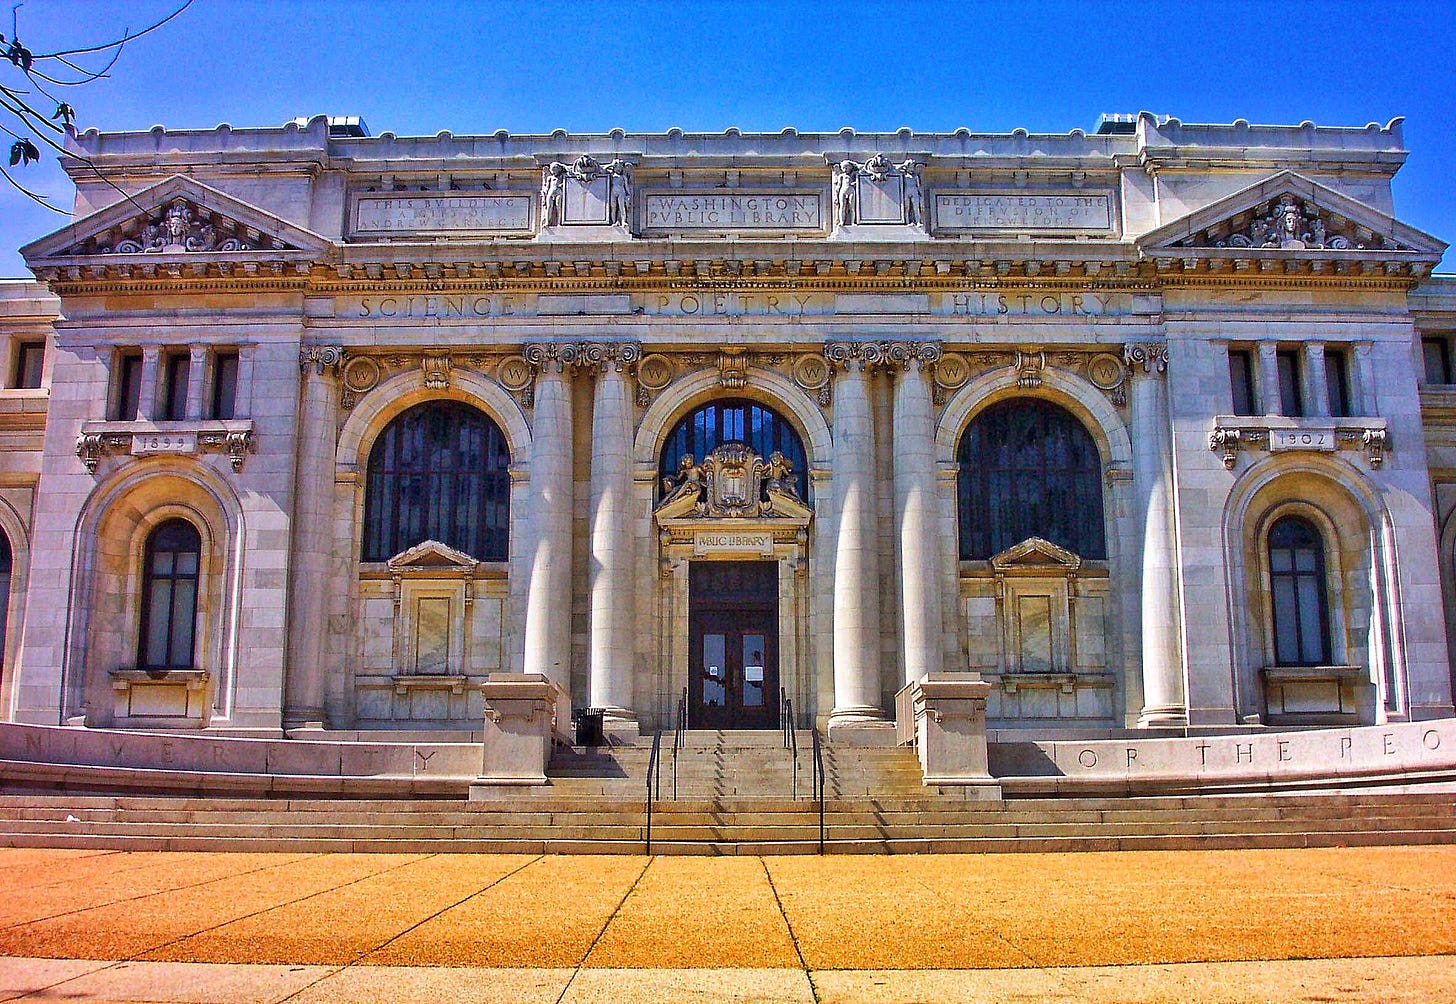 An ornate neo-classical building clad in stone. Carved into the front, it says many things, including “THIS BVILDING A GIFT OF ANDREW CARNEGIE” and “PVBLIC LIBRARY”